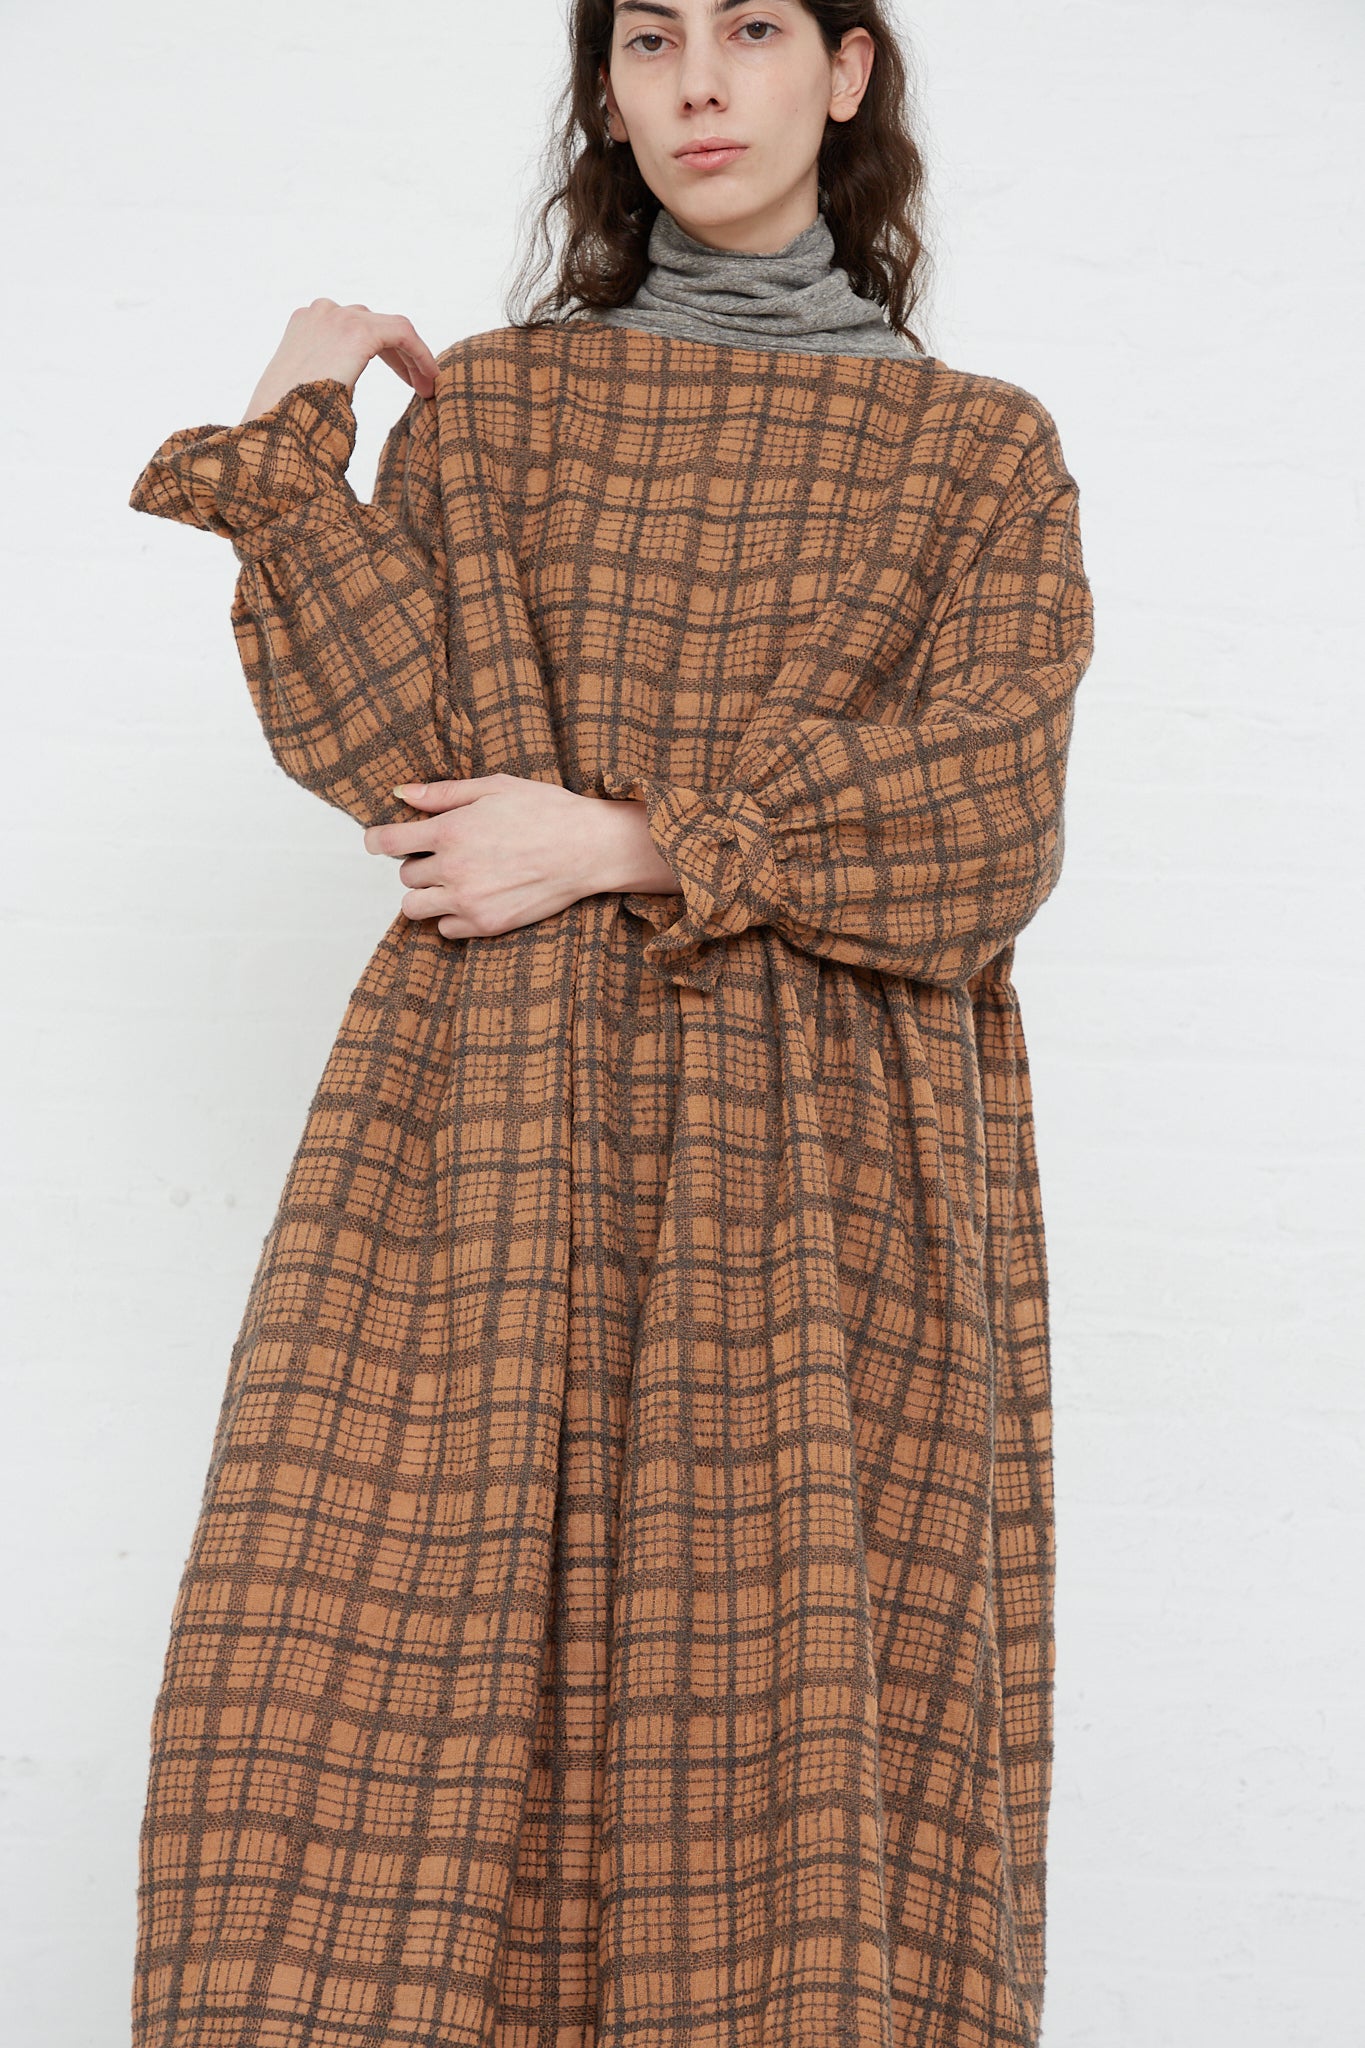 A woman wearing an Ichi Antiquités Woven Wool Check Dress in Terracotta, consisting of a wide neck and long sleeves.